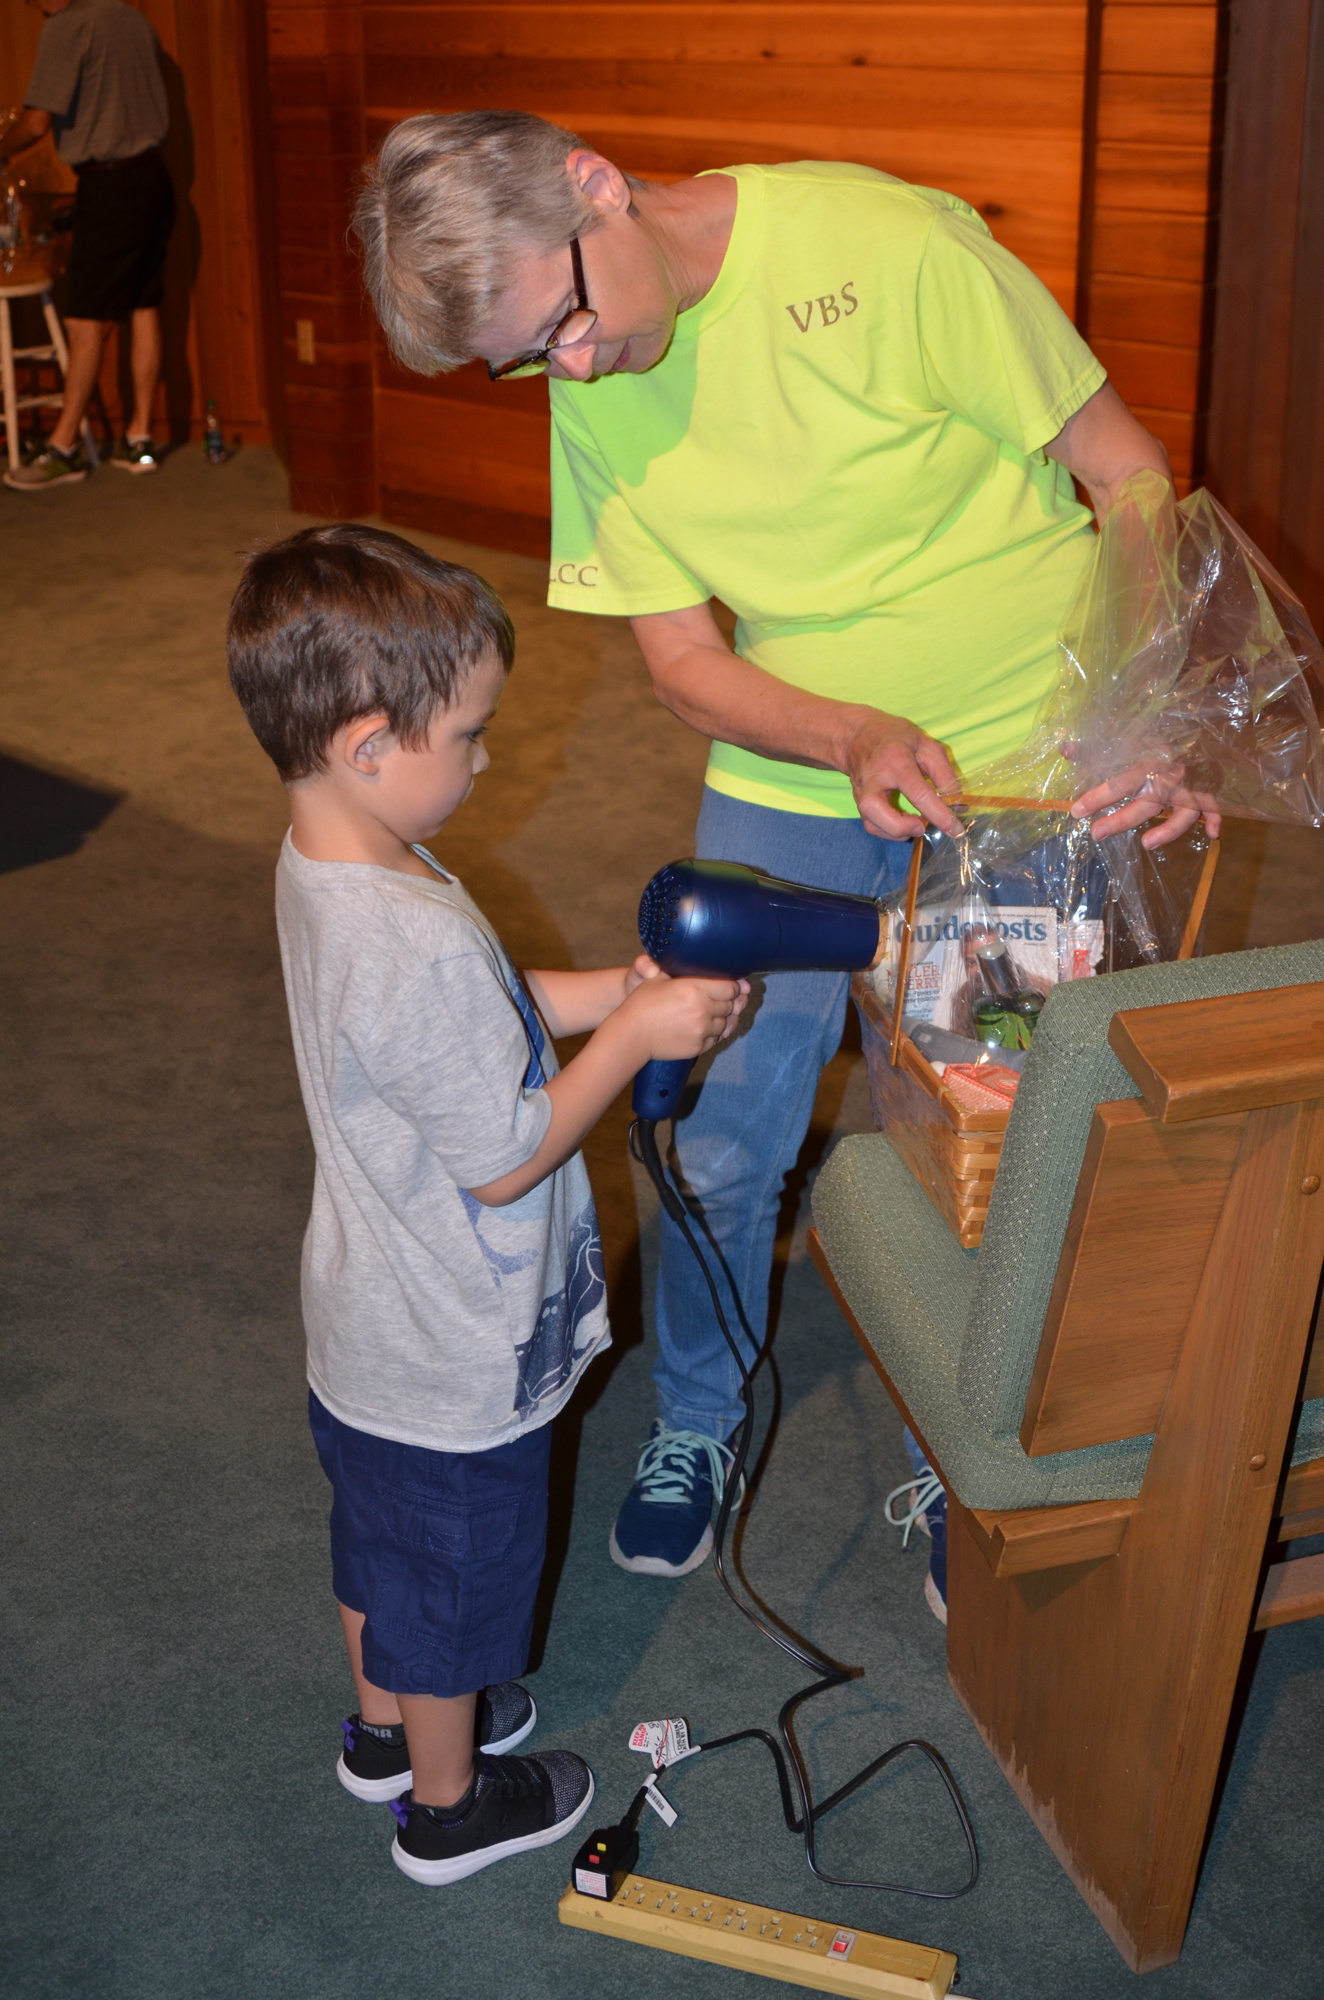 Landon Bliven assists Diane Gardner in shrinking the cellophane on a Mother’s Day basket. Landon’s mother received a similar basket last May when they were in the hospital for Landon’s medical treatment for leukemia.